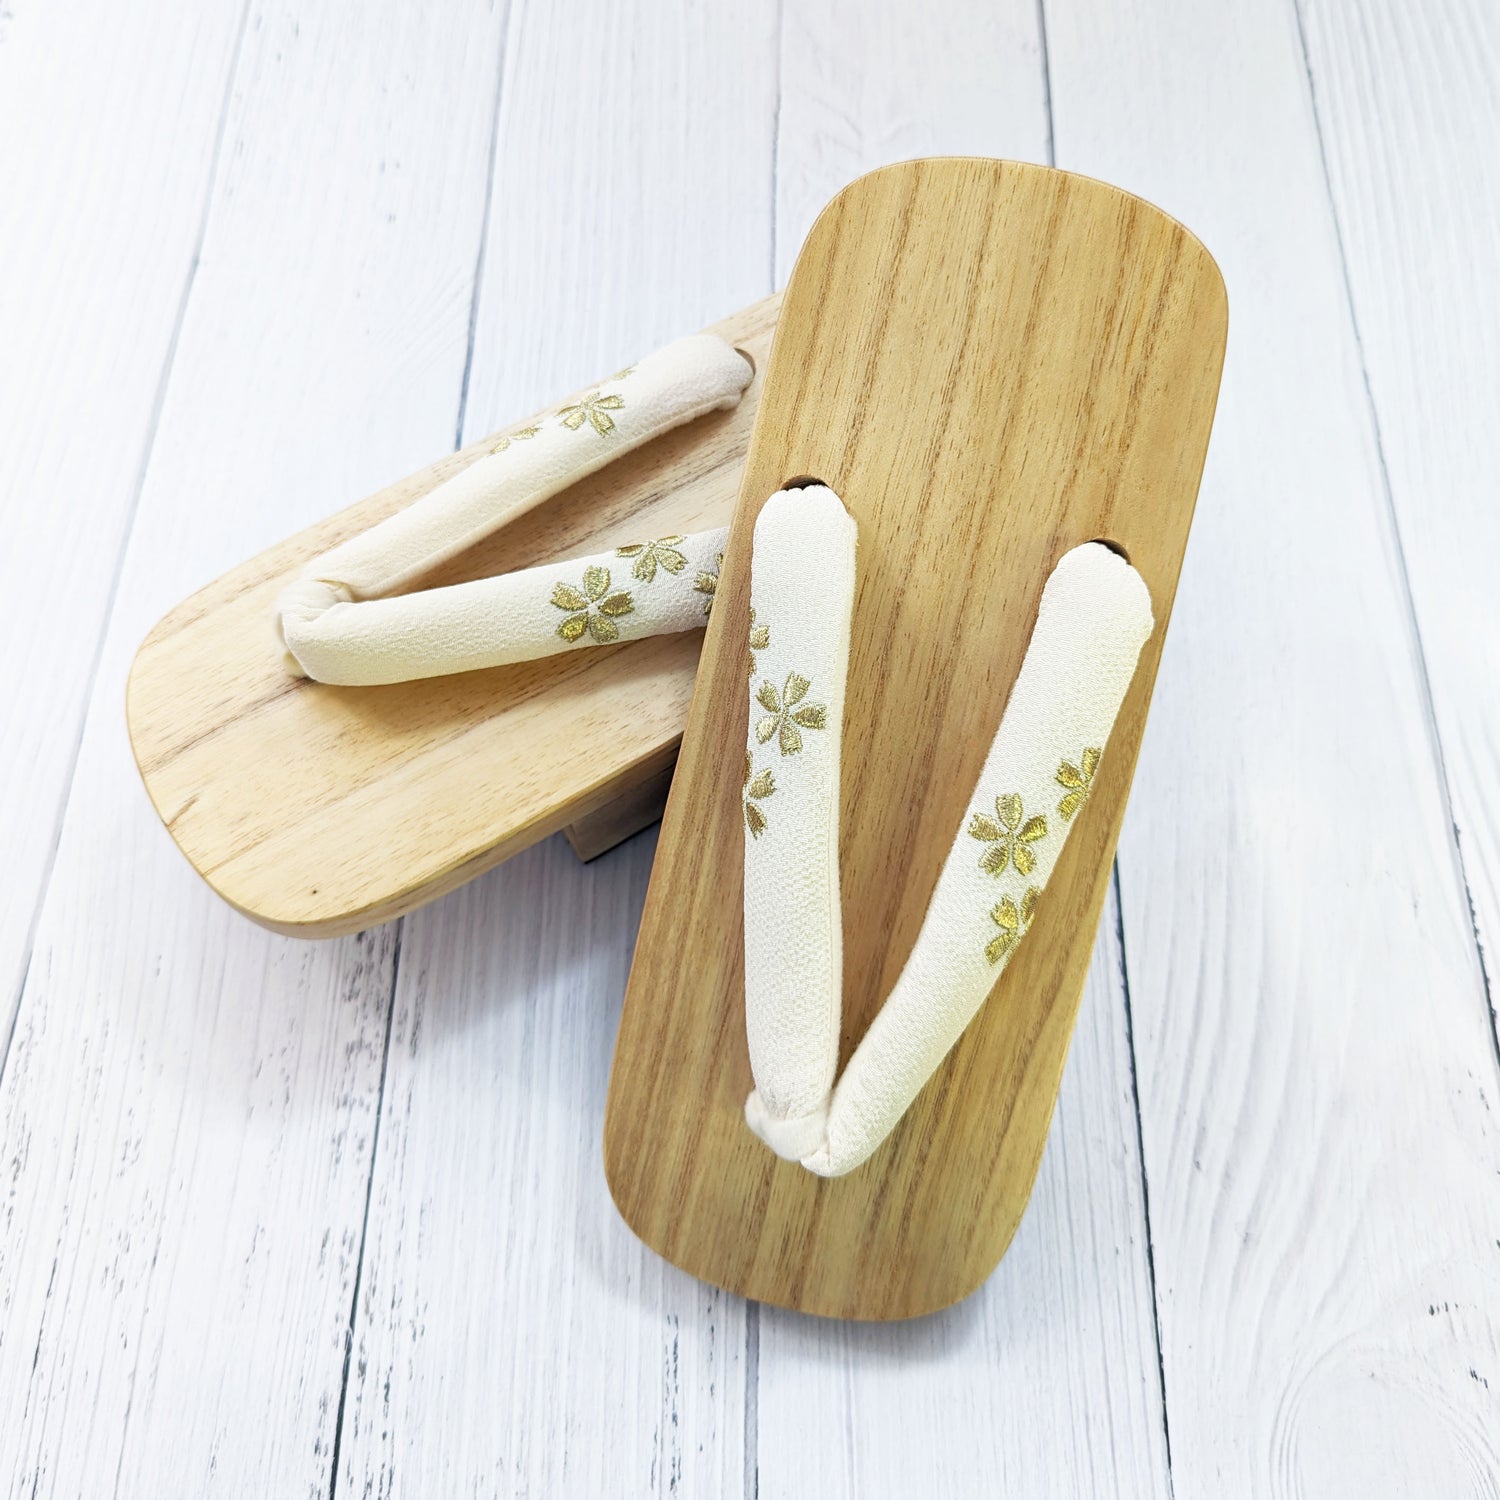 Japanese Wooden Geta Sandals - Cherry Blossom Embroidery Beige